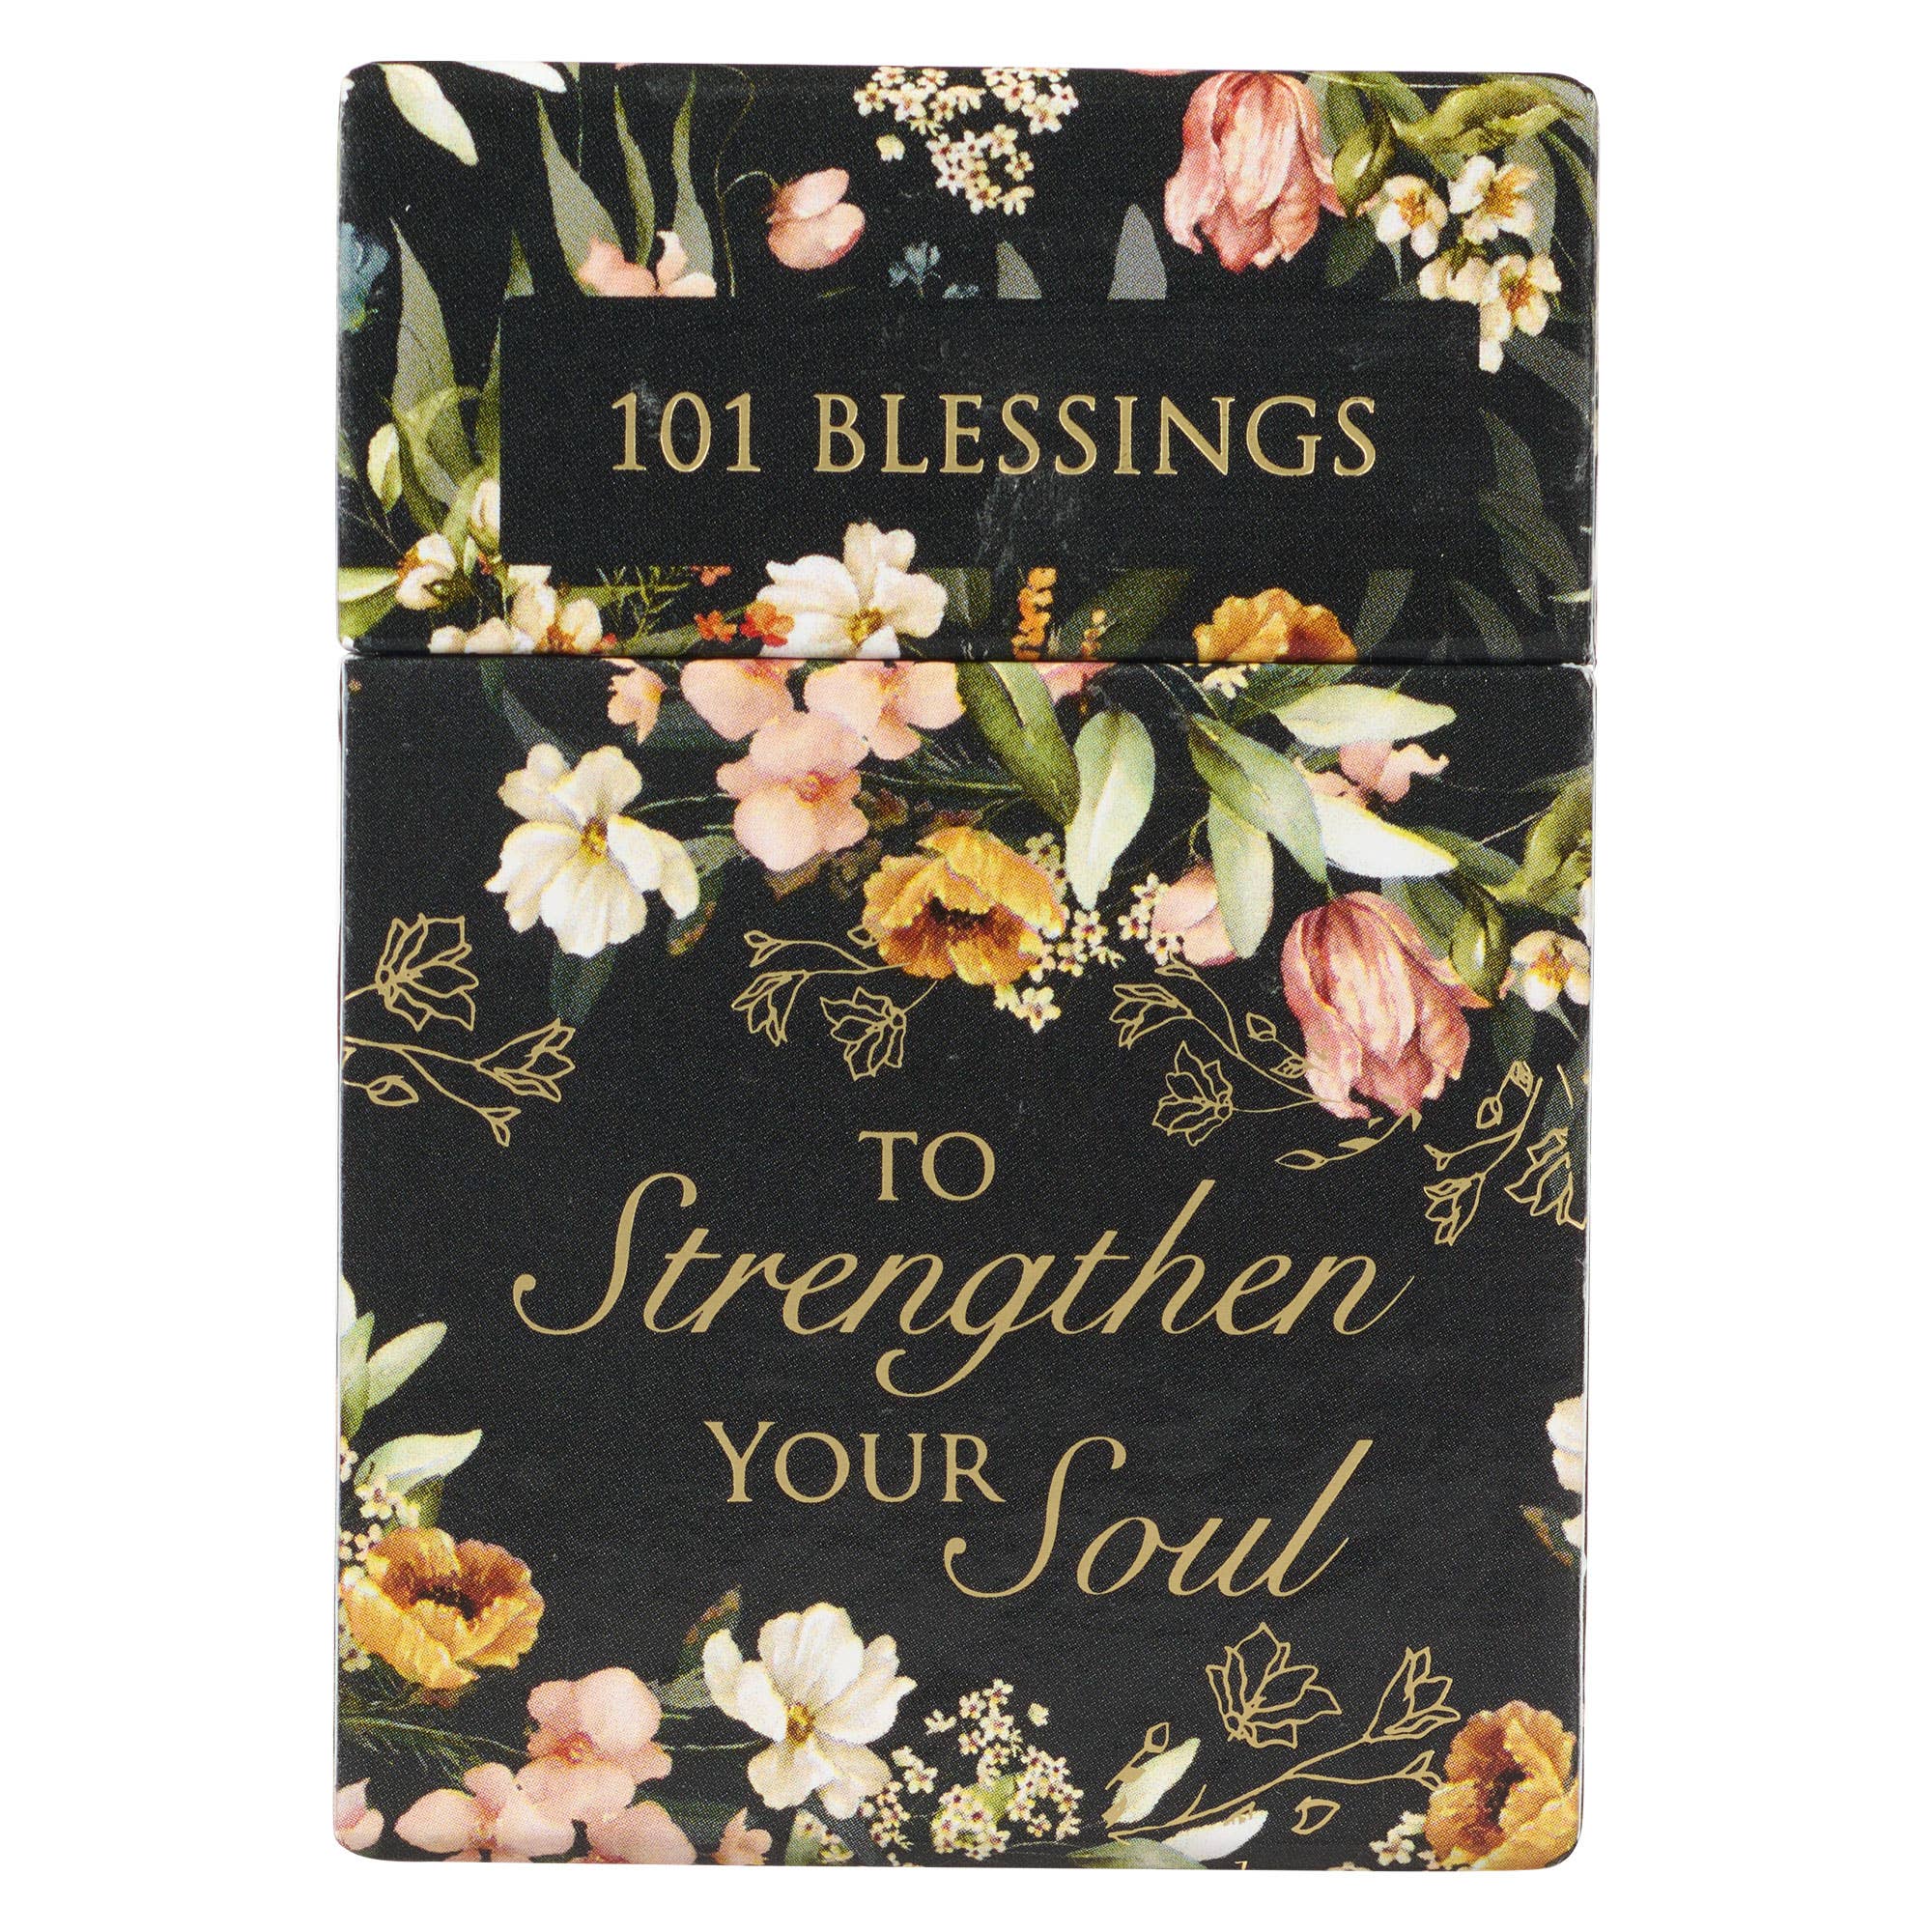 101 Blessings To Strengthen Your Soul